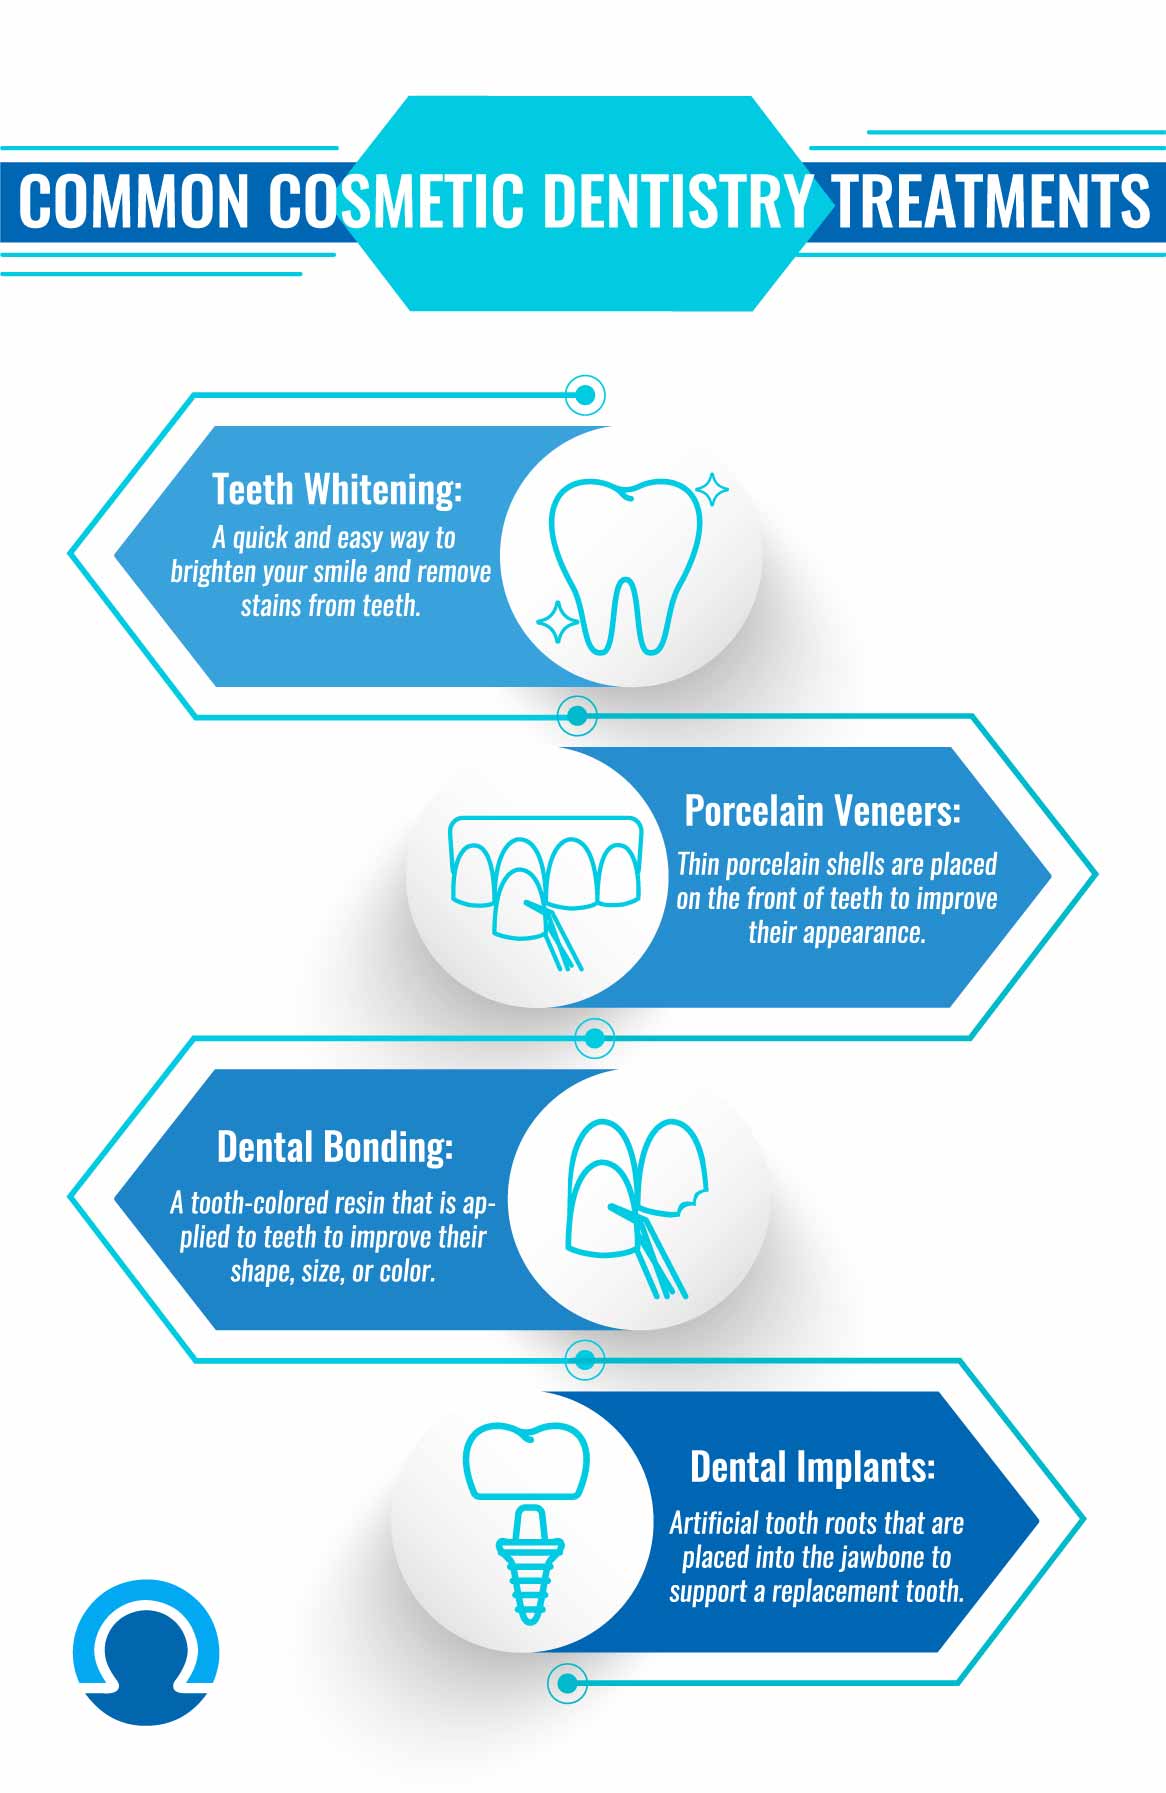 Common Cosmetic Dentistry Treatments